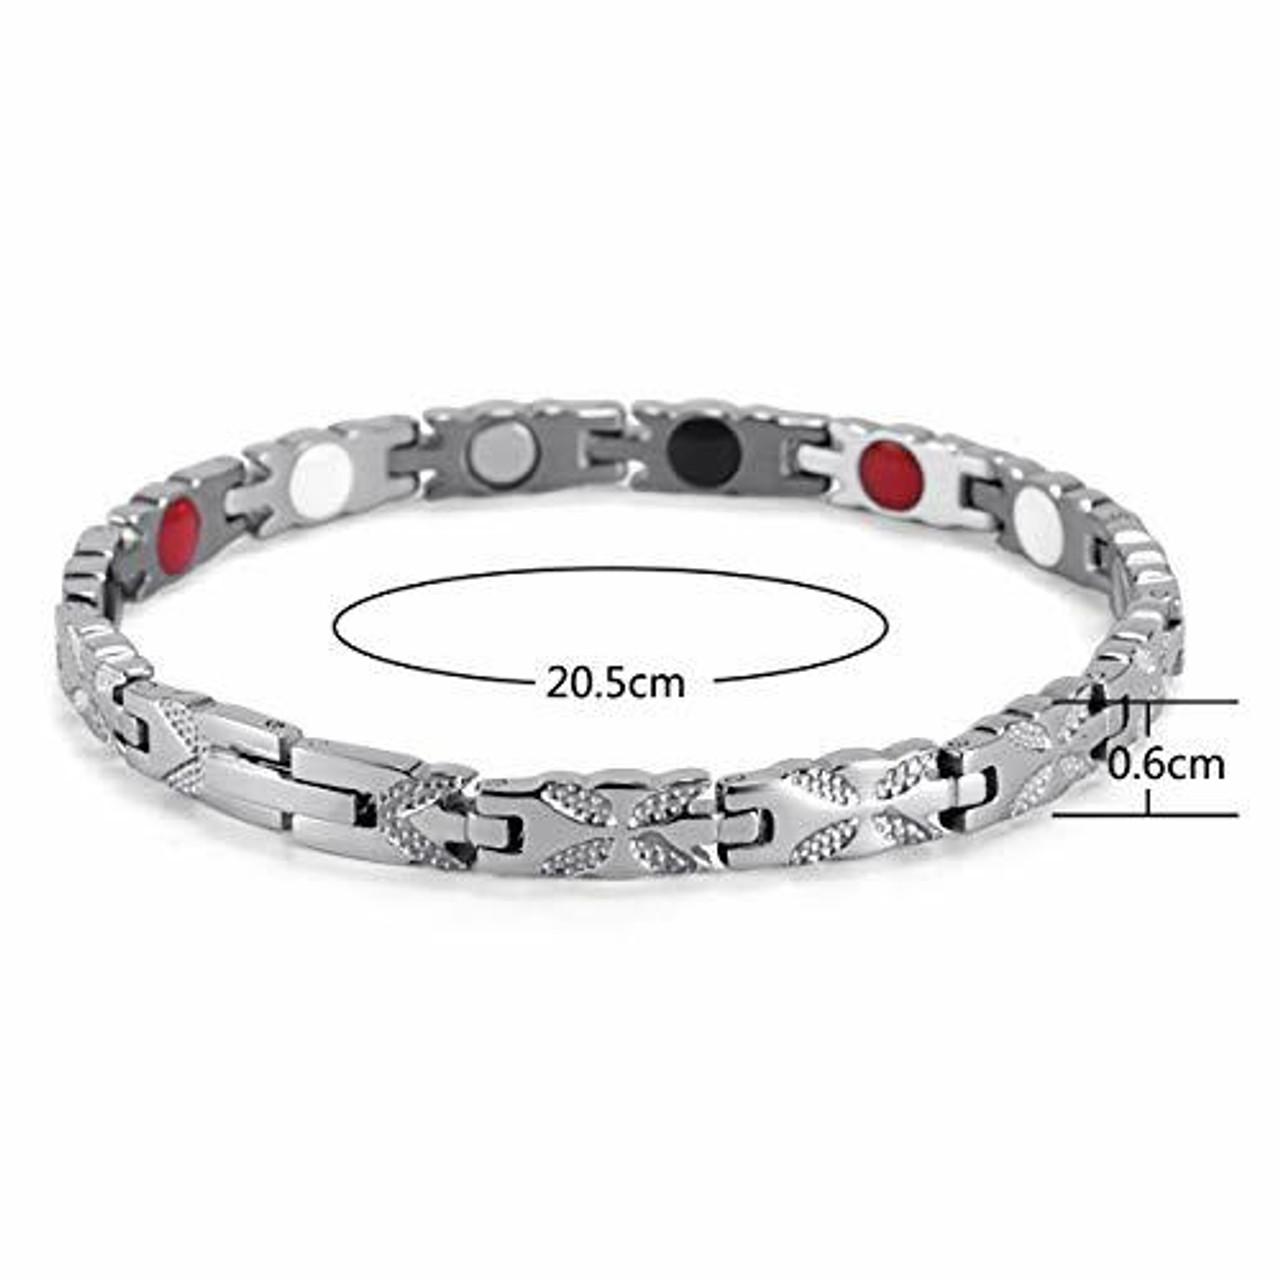 8" Inch - Magnetic Stainless Steel Bracelet for Women - Silver Tone Stainless Steel Magnetic Bracelet with magnets, far infrared, germanium and negative Ion technology)